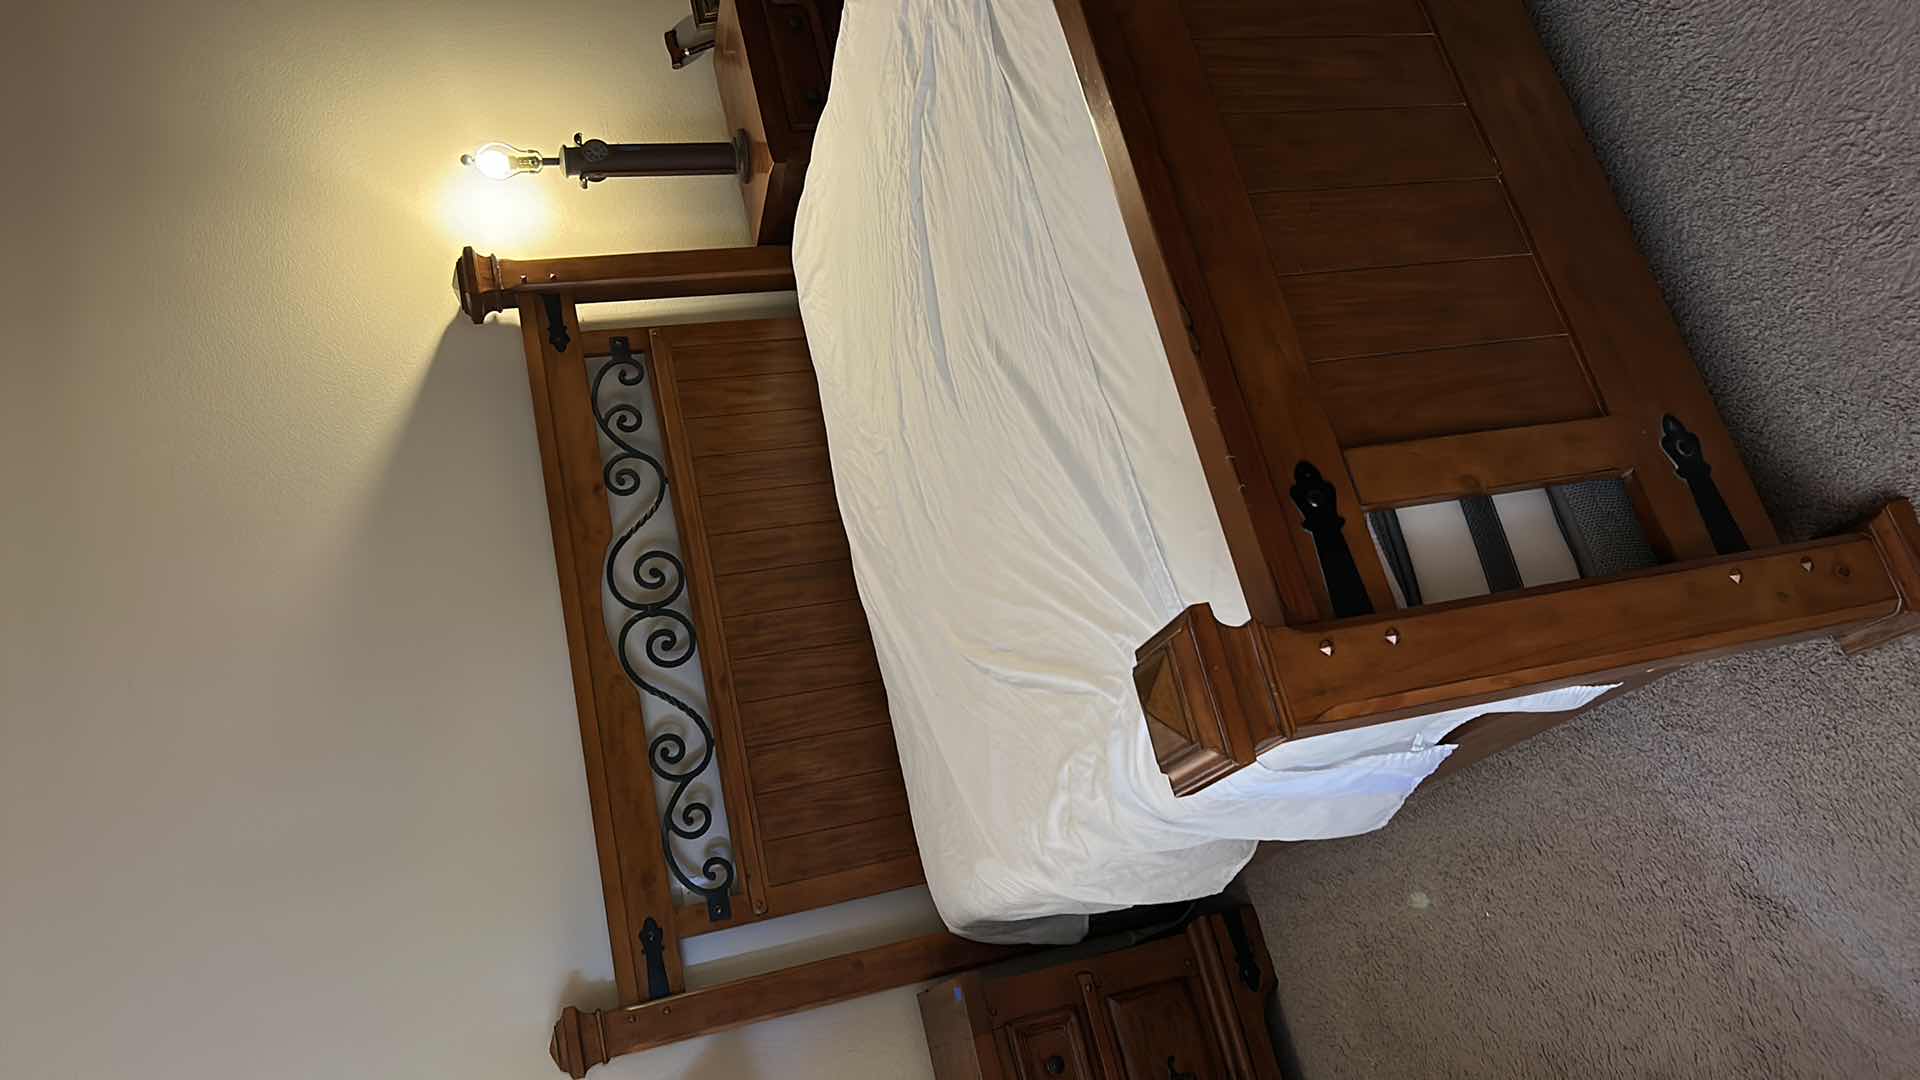 Photo 11 of HOME FURNITURE - WOOD WITH METAL ACCENTS - KING BEDFRAME HEADBOARD AND FOOTBOARD 82. 5” x 90” x H61” (MATTRESS AND OTHER PIECES SOLD SEPERATELY)